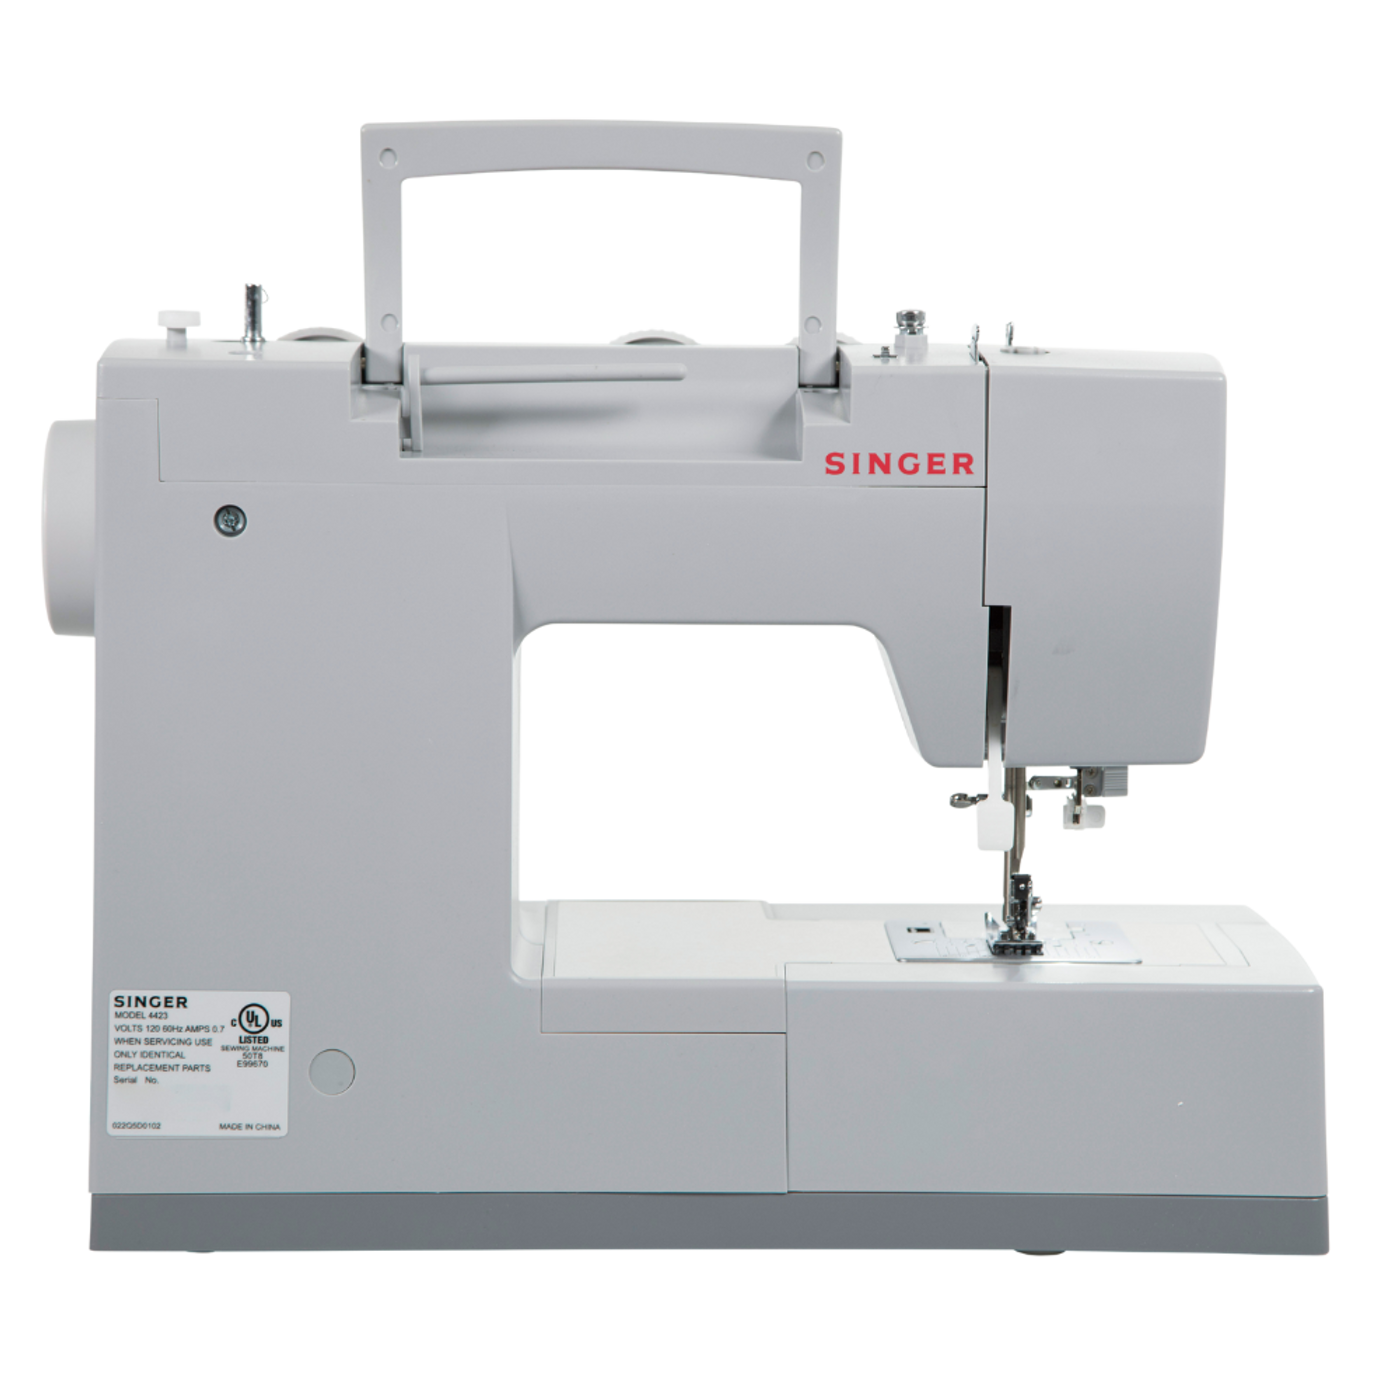 Singer Heavy Duty 4423 Sewing Machine - Robust and Versatile